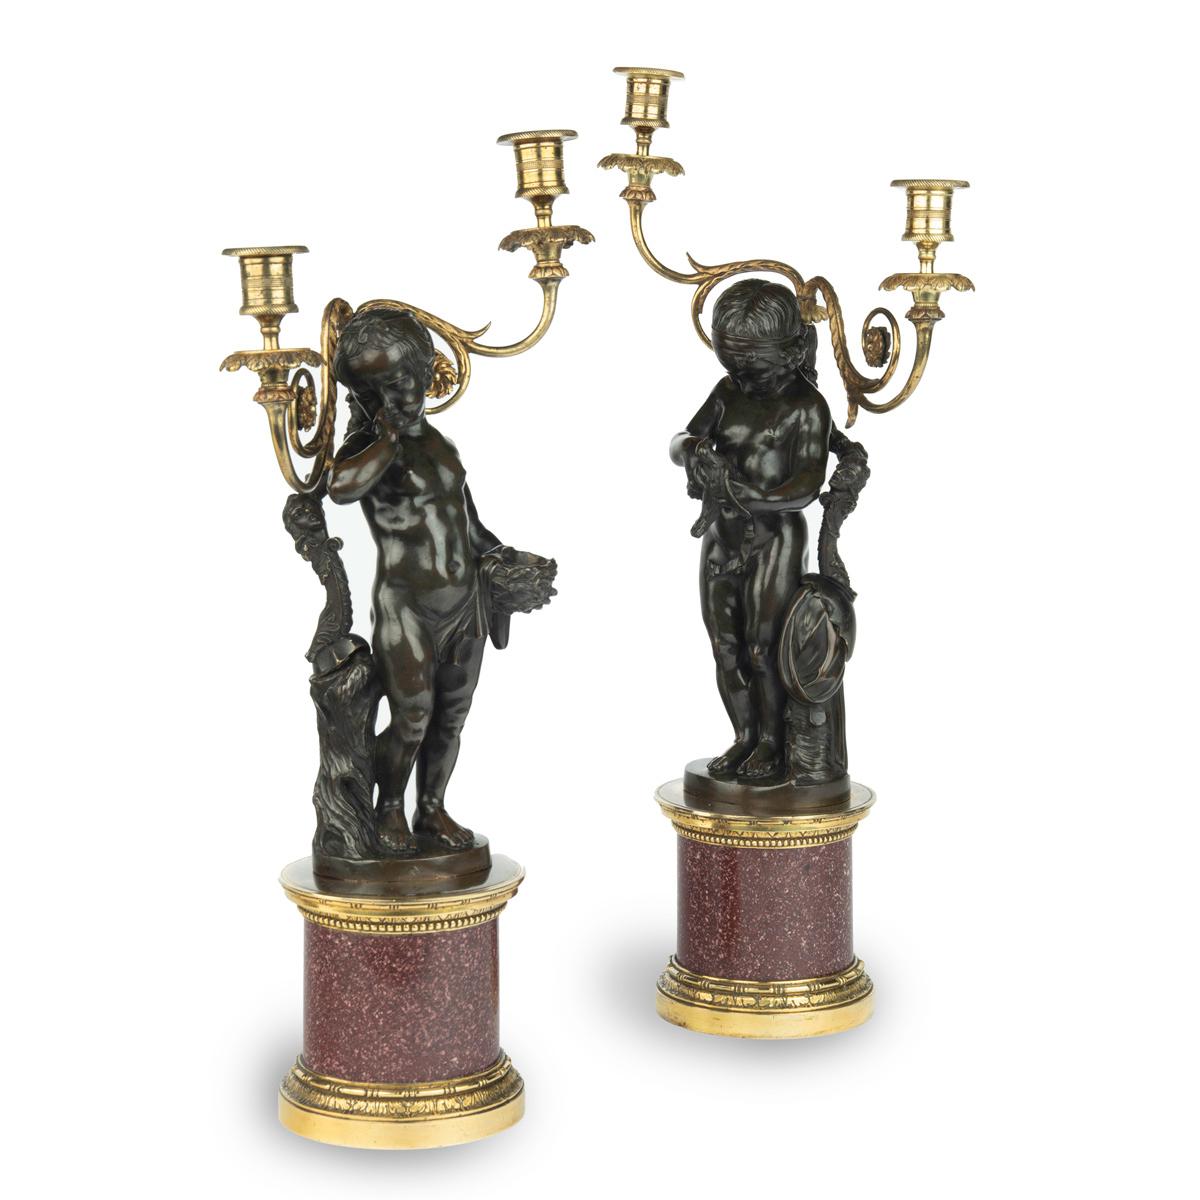 A pair of Egyptian porphyry and bronze candelabra after Charles-Antoine Bridan, each comprising a bronze figure and two candle branches set on a cylindrical porphyry base with ormolu mounts, one showing the figure of a young girl crying over an